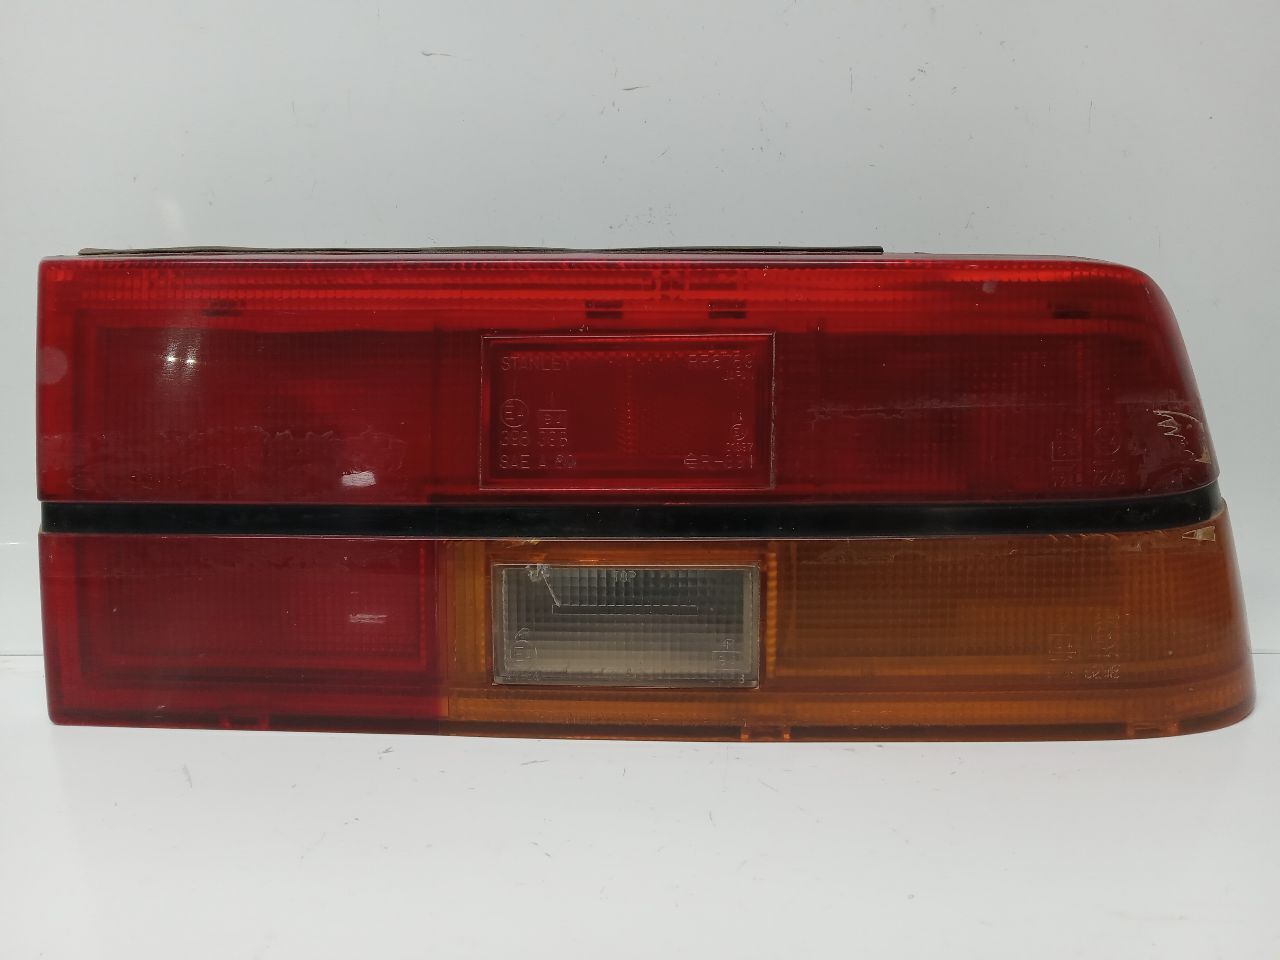 Used Right Tail Light Assembly fits: 1986 Mitsubishi Cordia Right Grade A